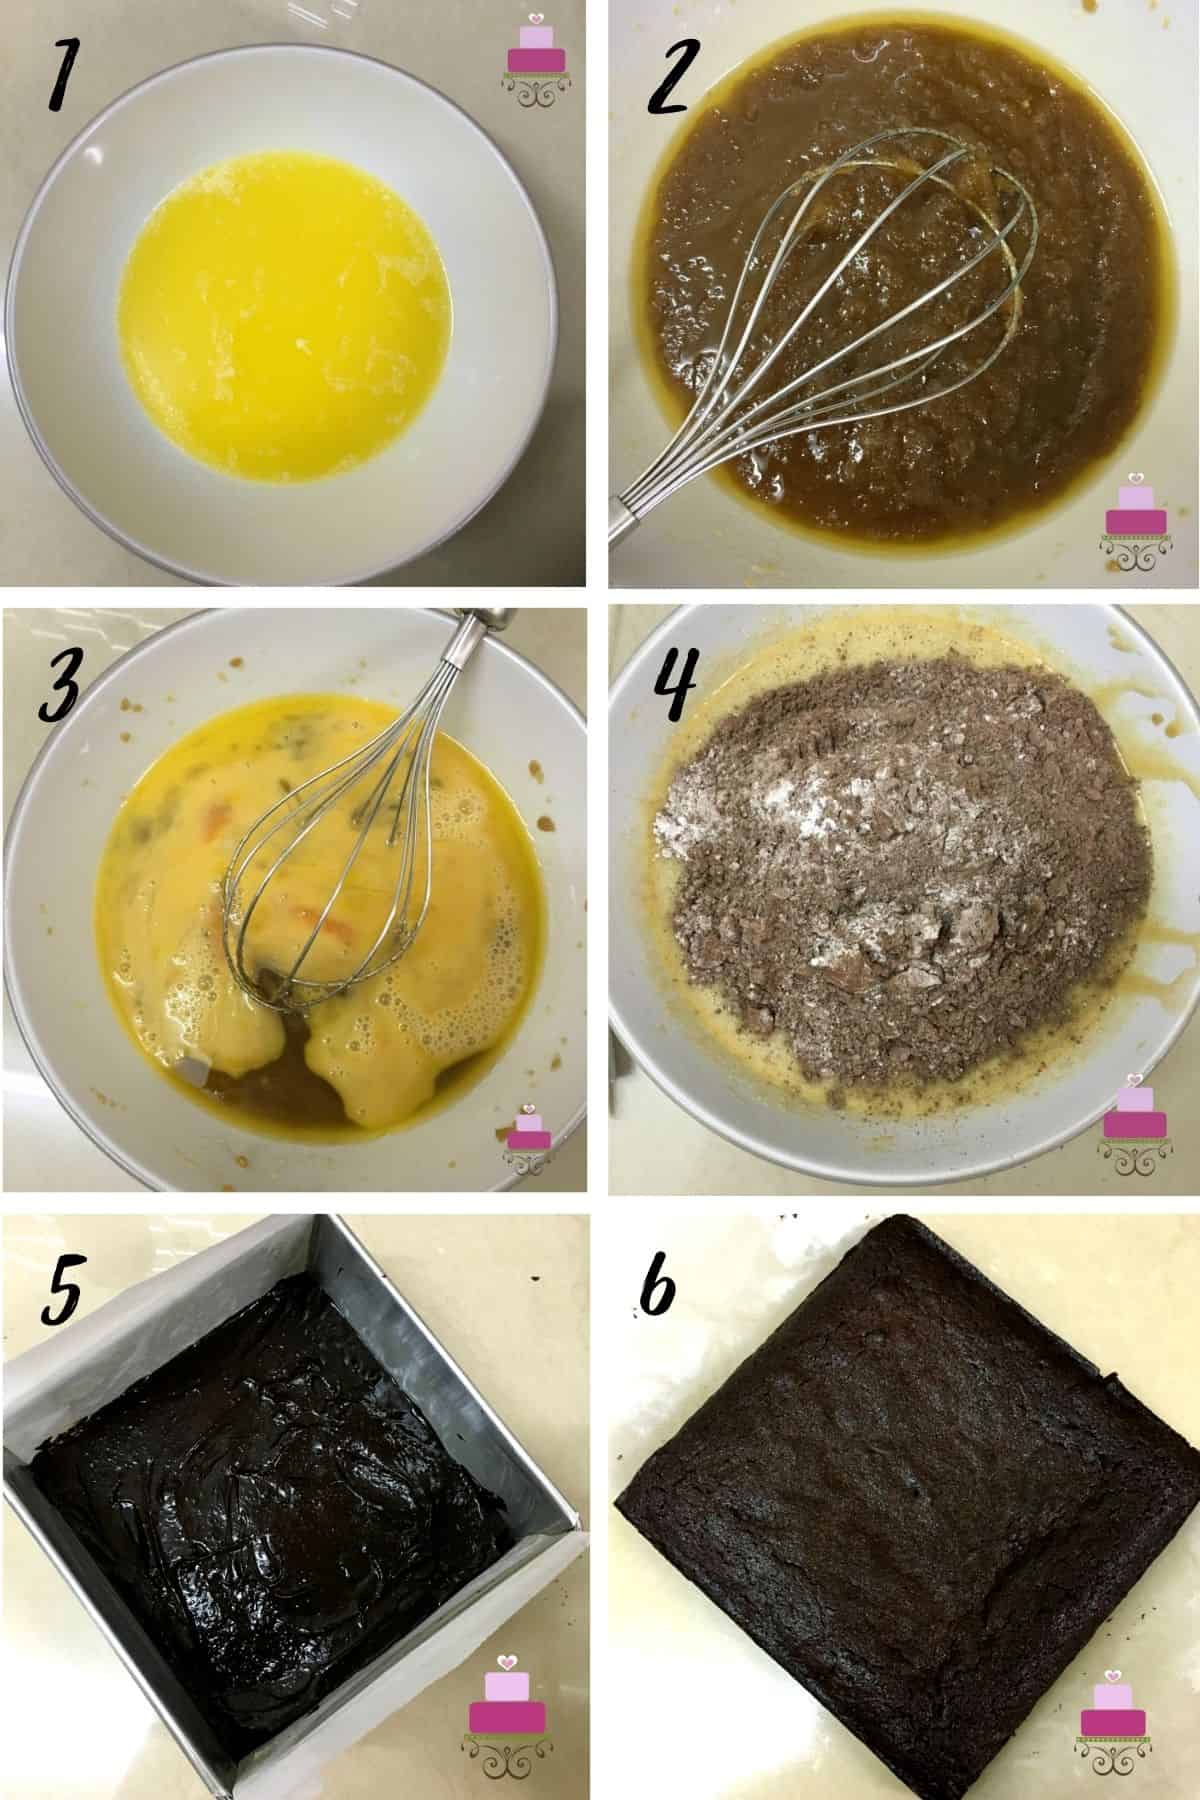 A poster of 6 images showing how to make chocolate brownies